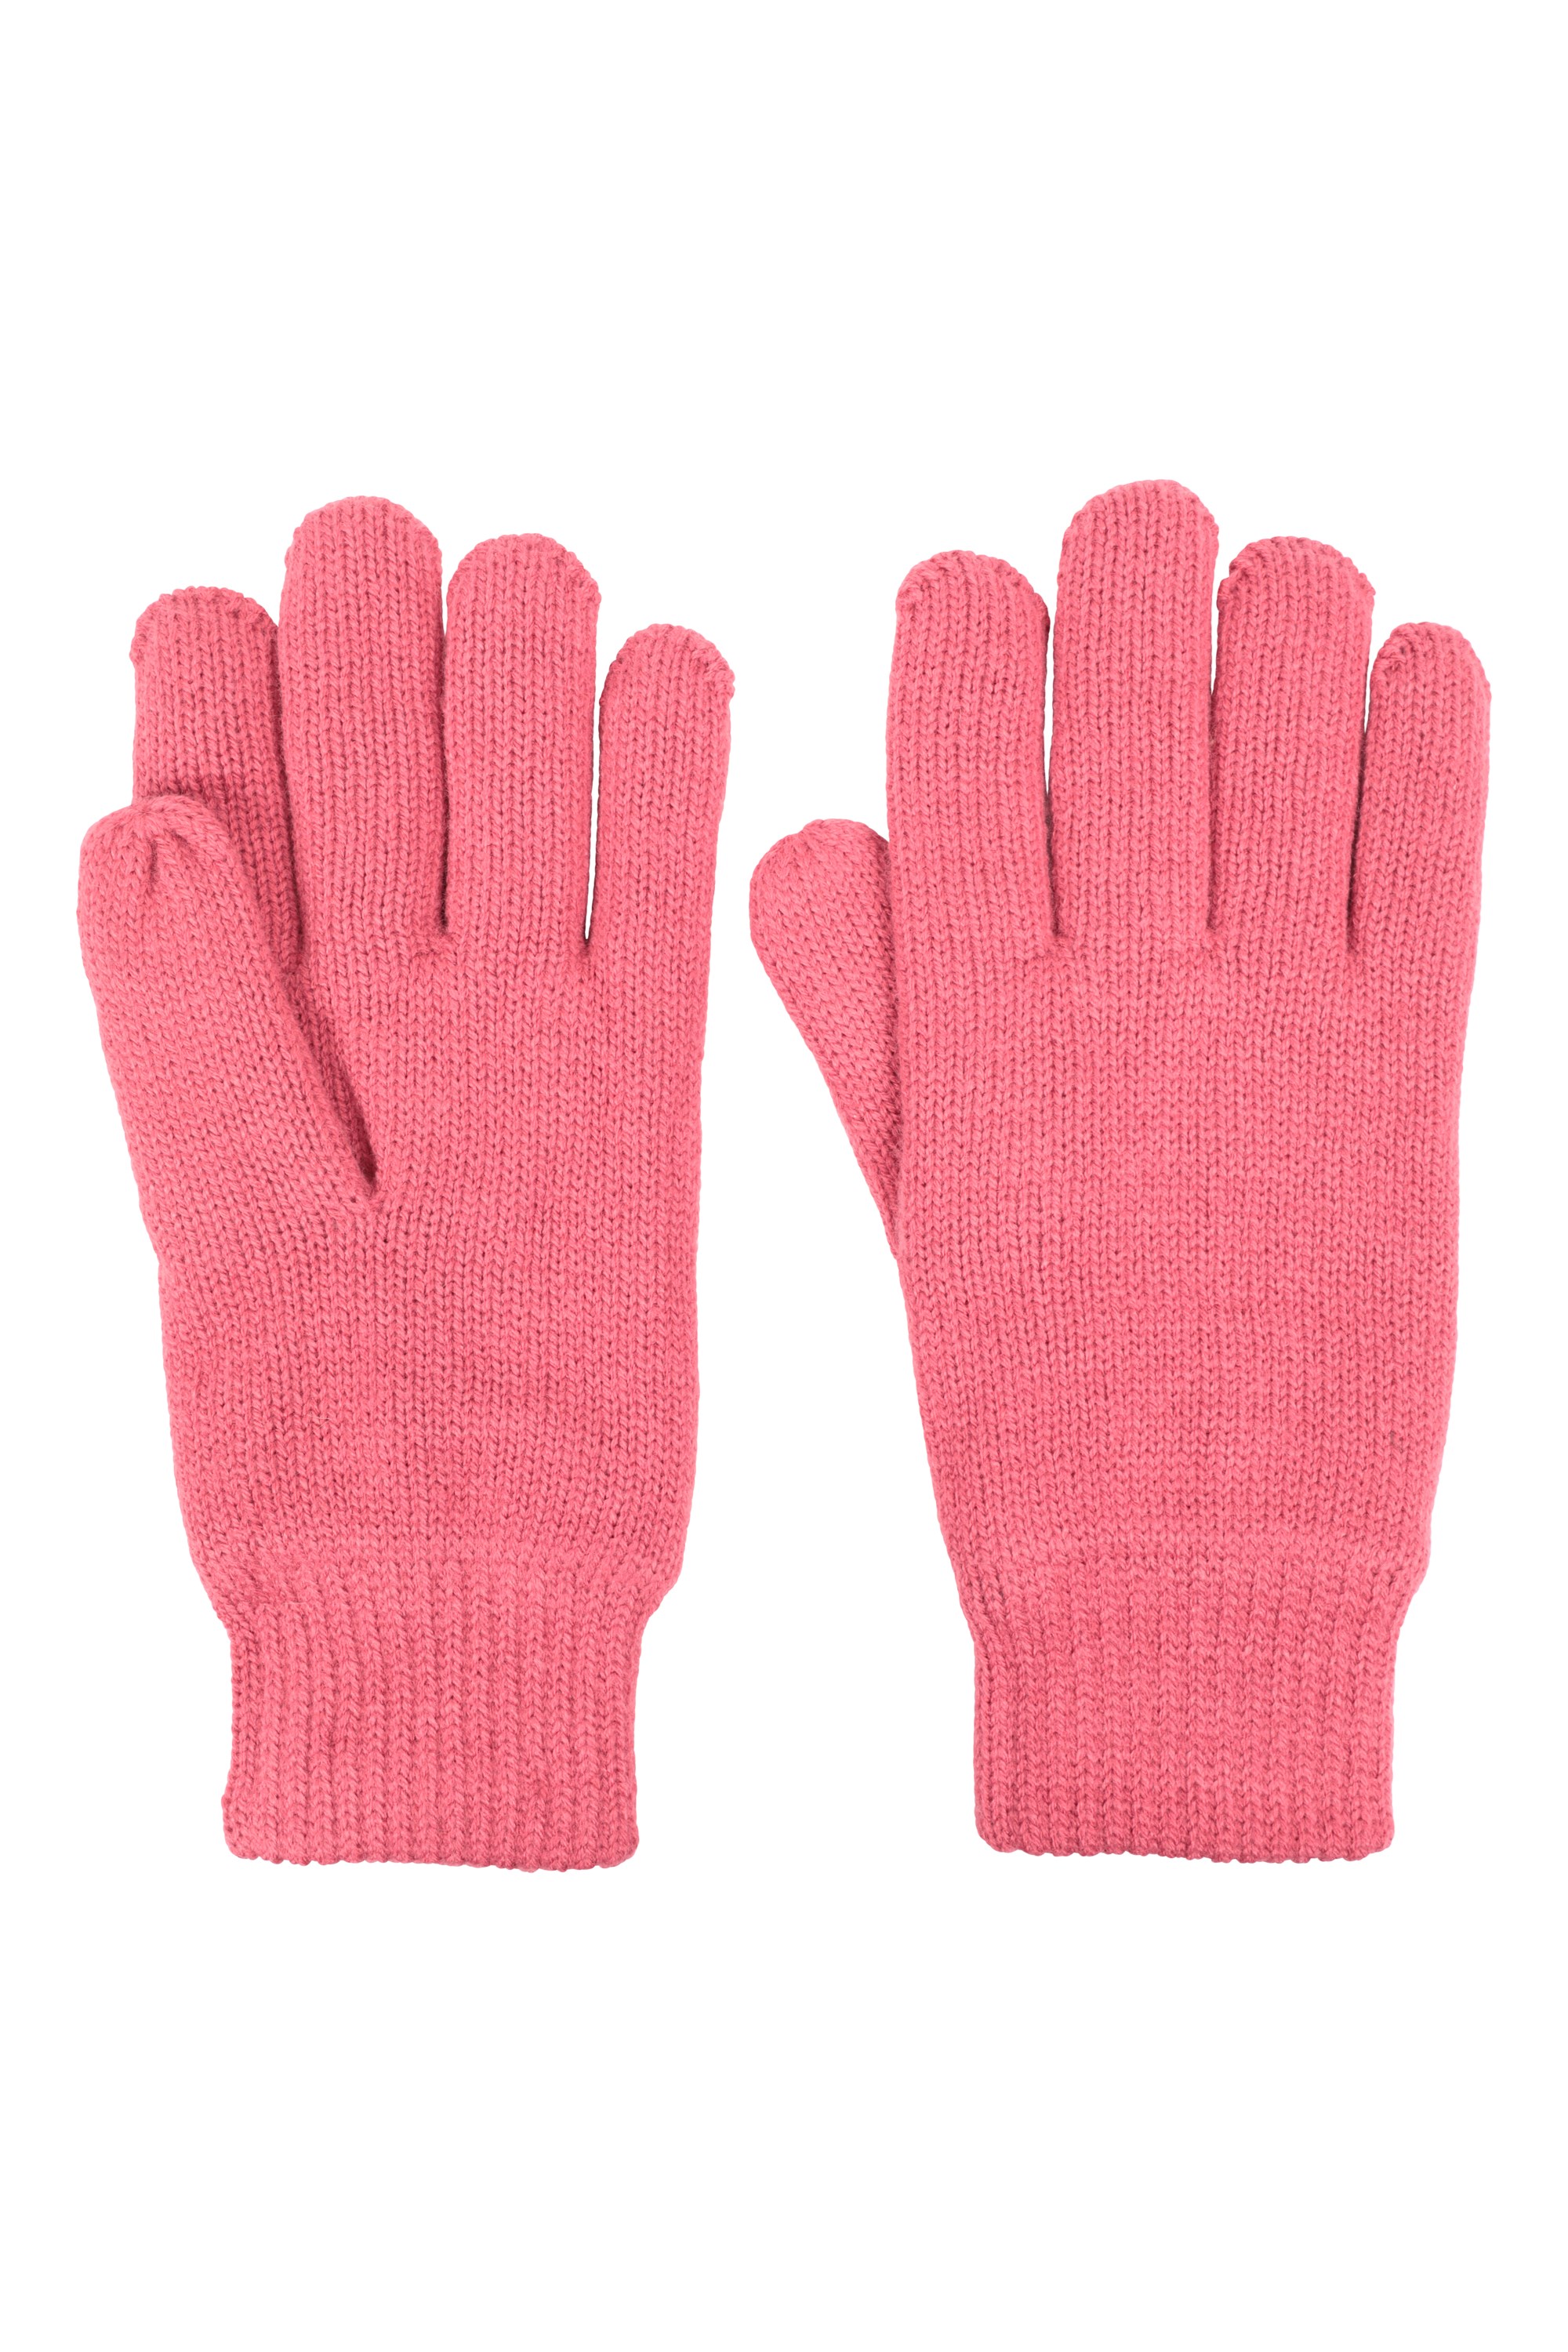 Girls Thinsulate Lined Ski Gloves Pink and Black 